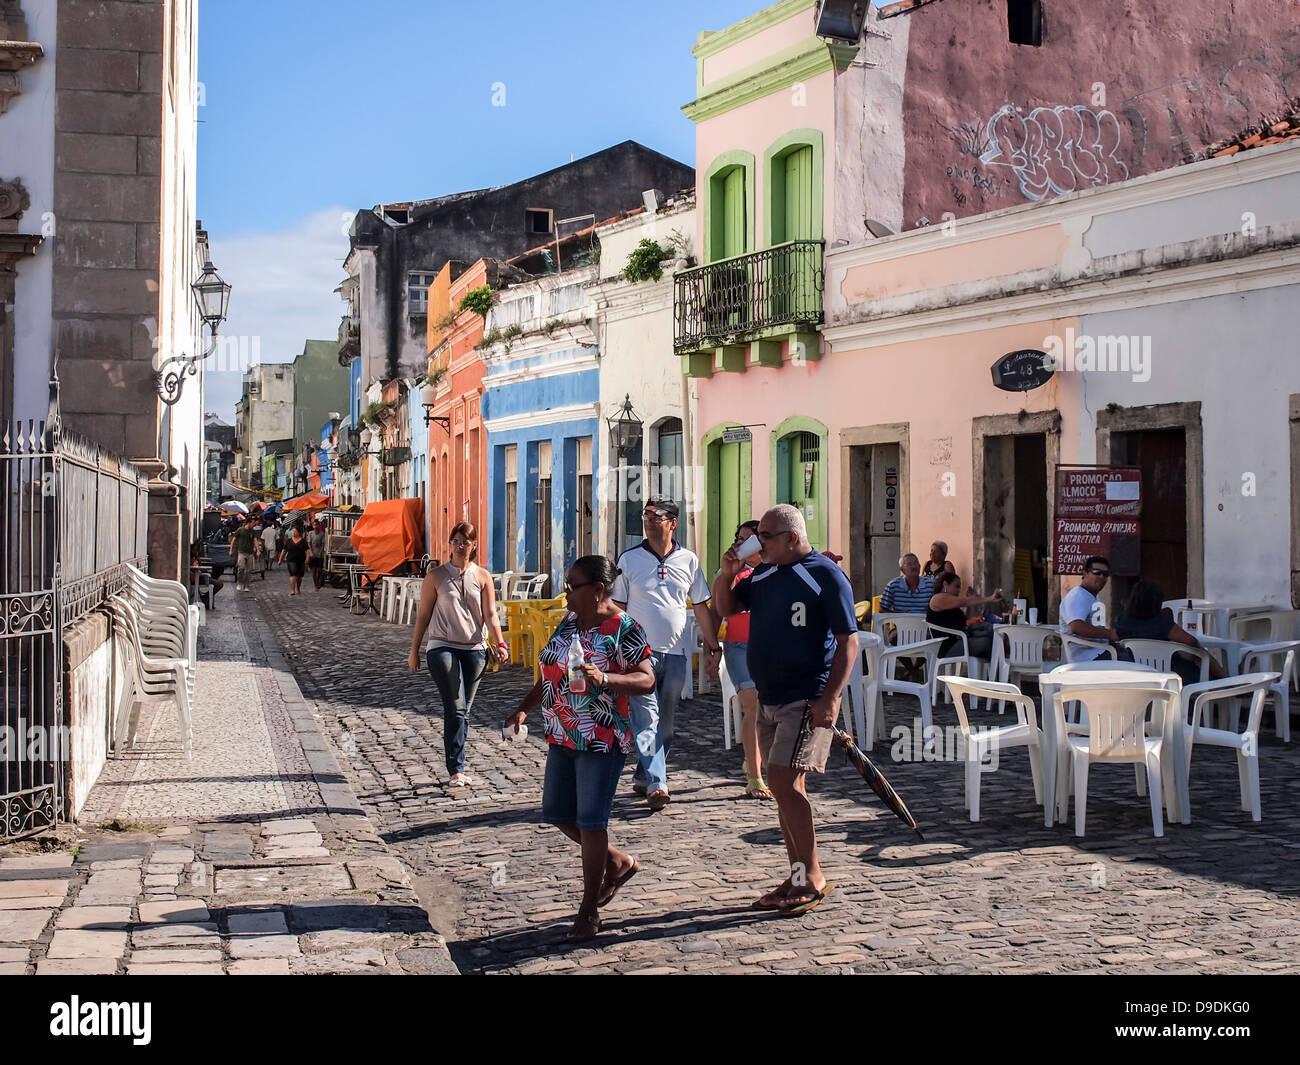 The historical center of Recife, the capital of Pernambco region in Brazil. Stock Photo